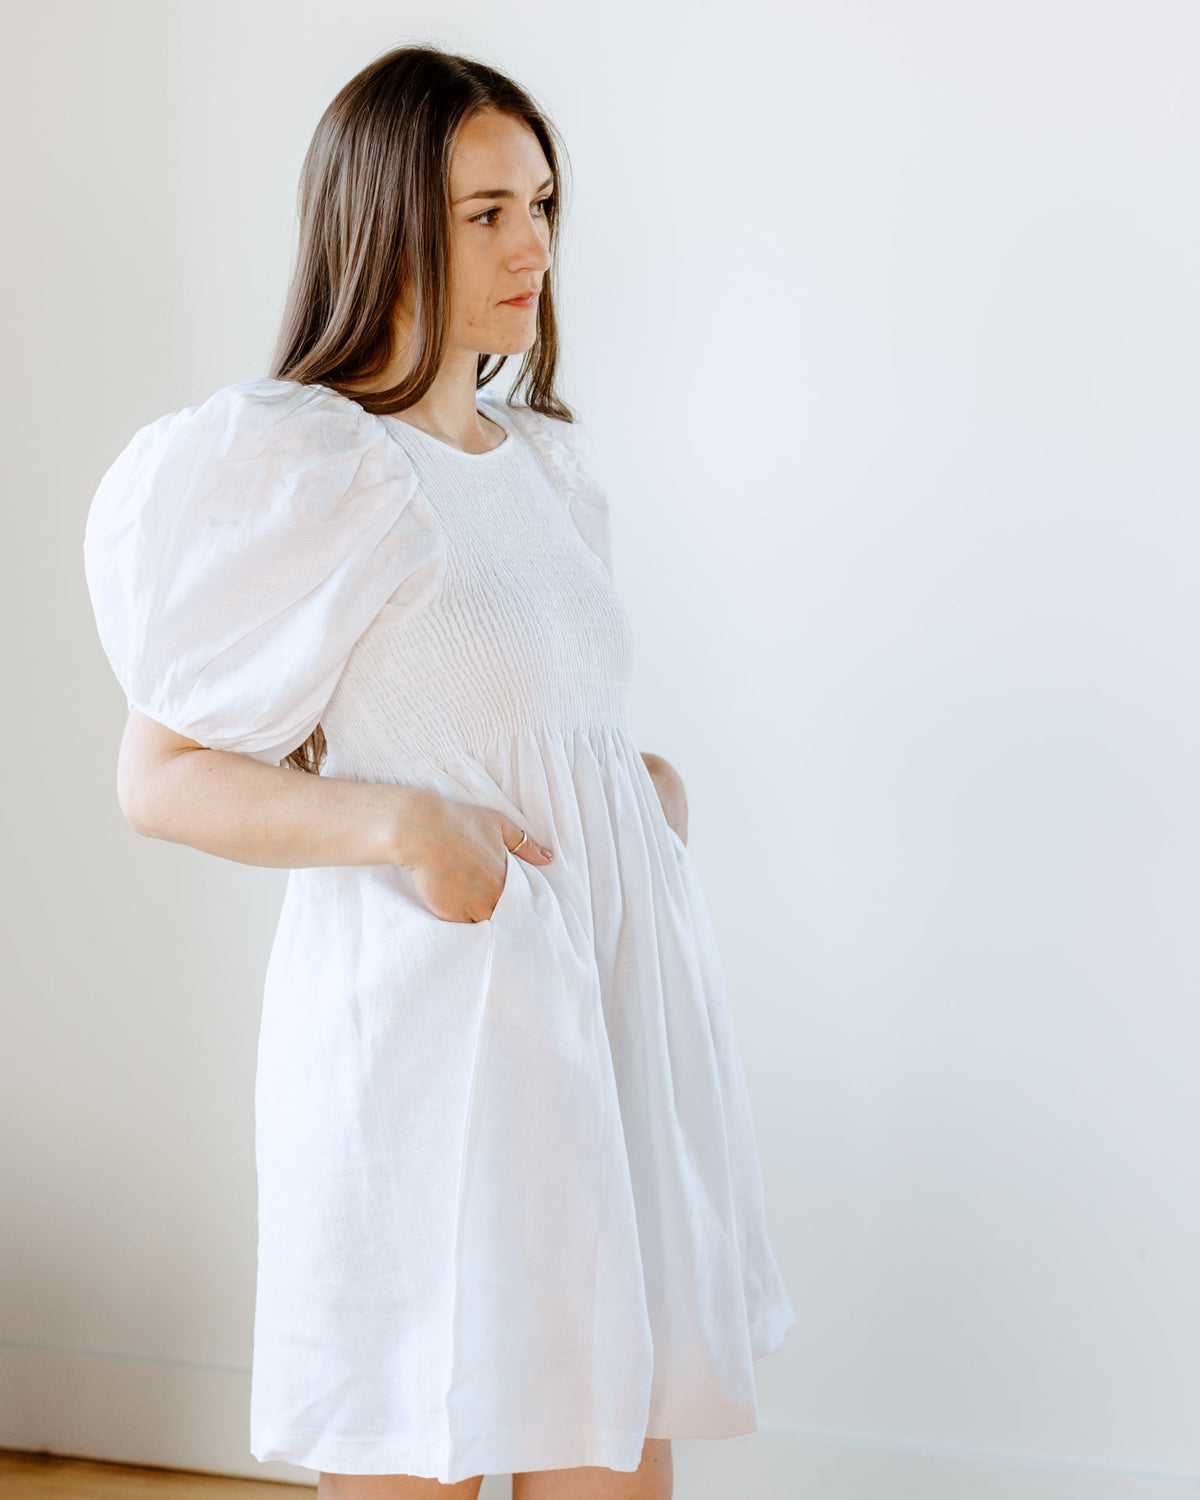 Beaumont Organic Clothing Layrah-May Linen Dress in White